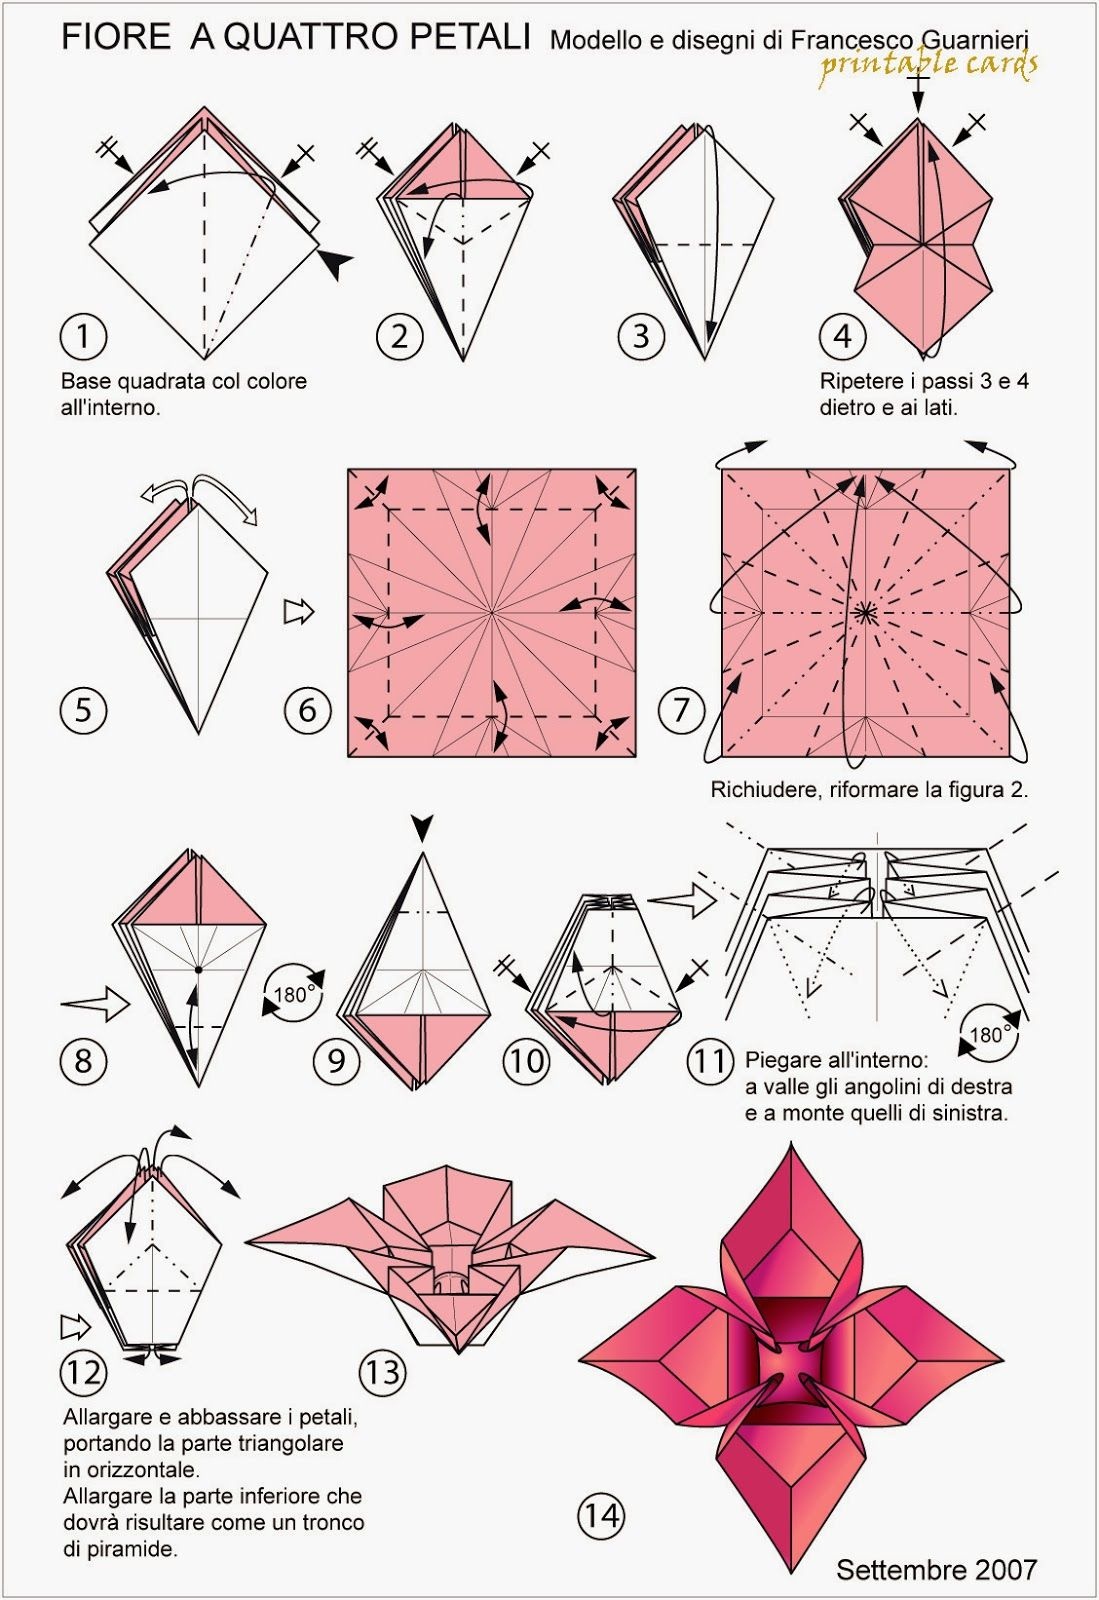 Origami Instructions Printable